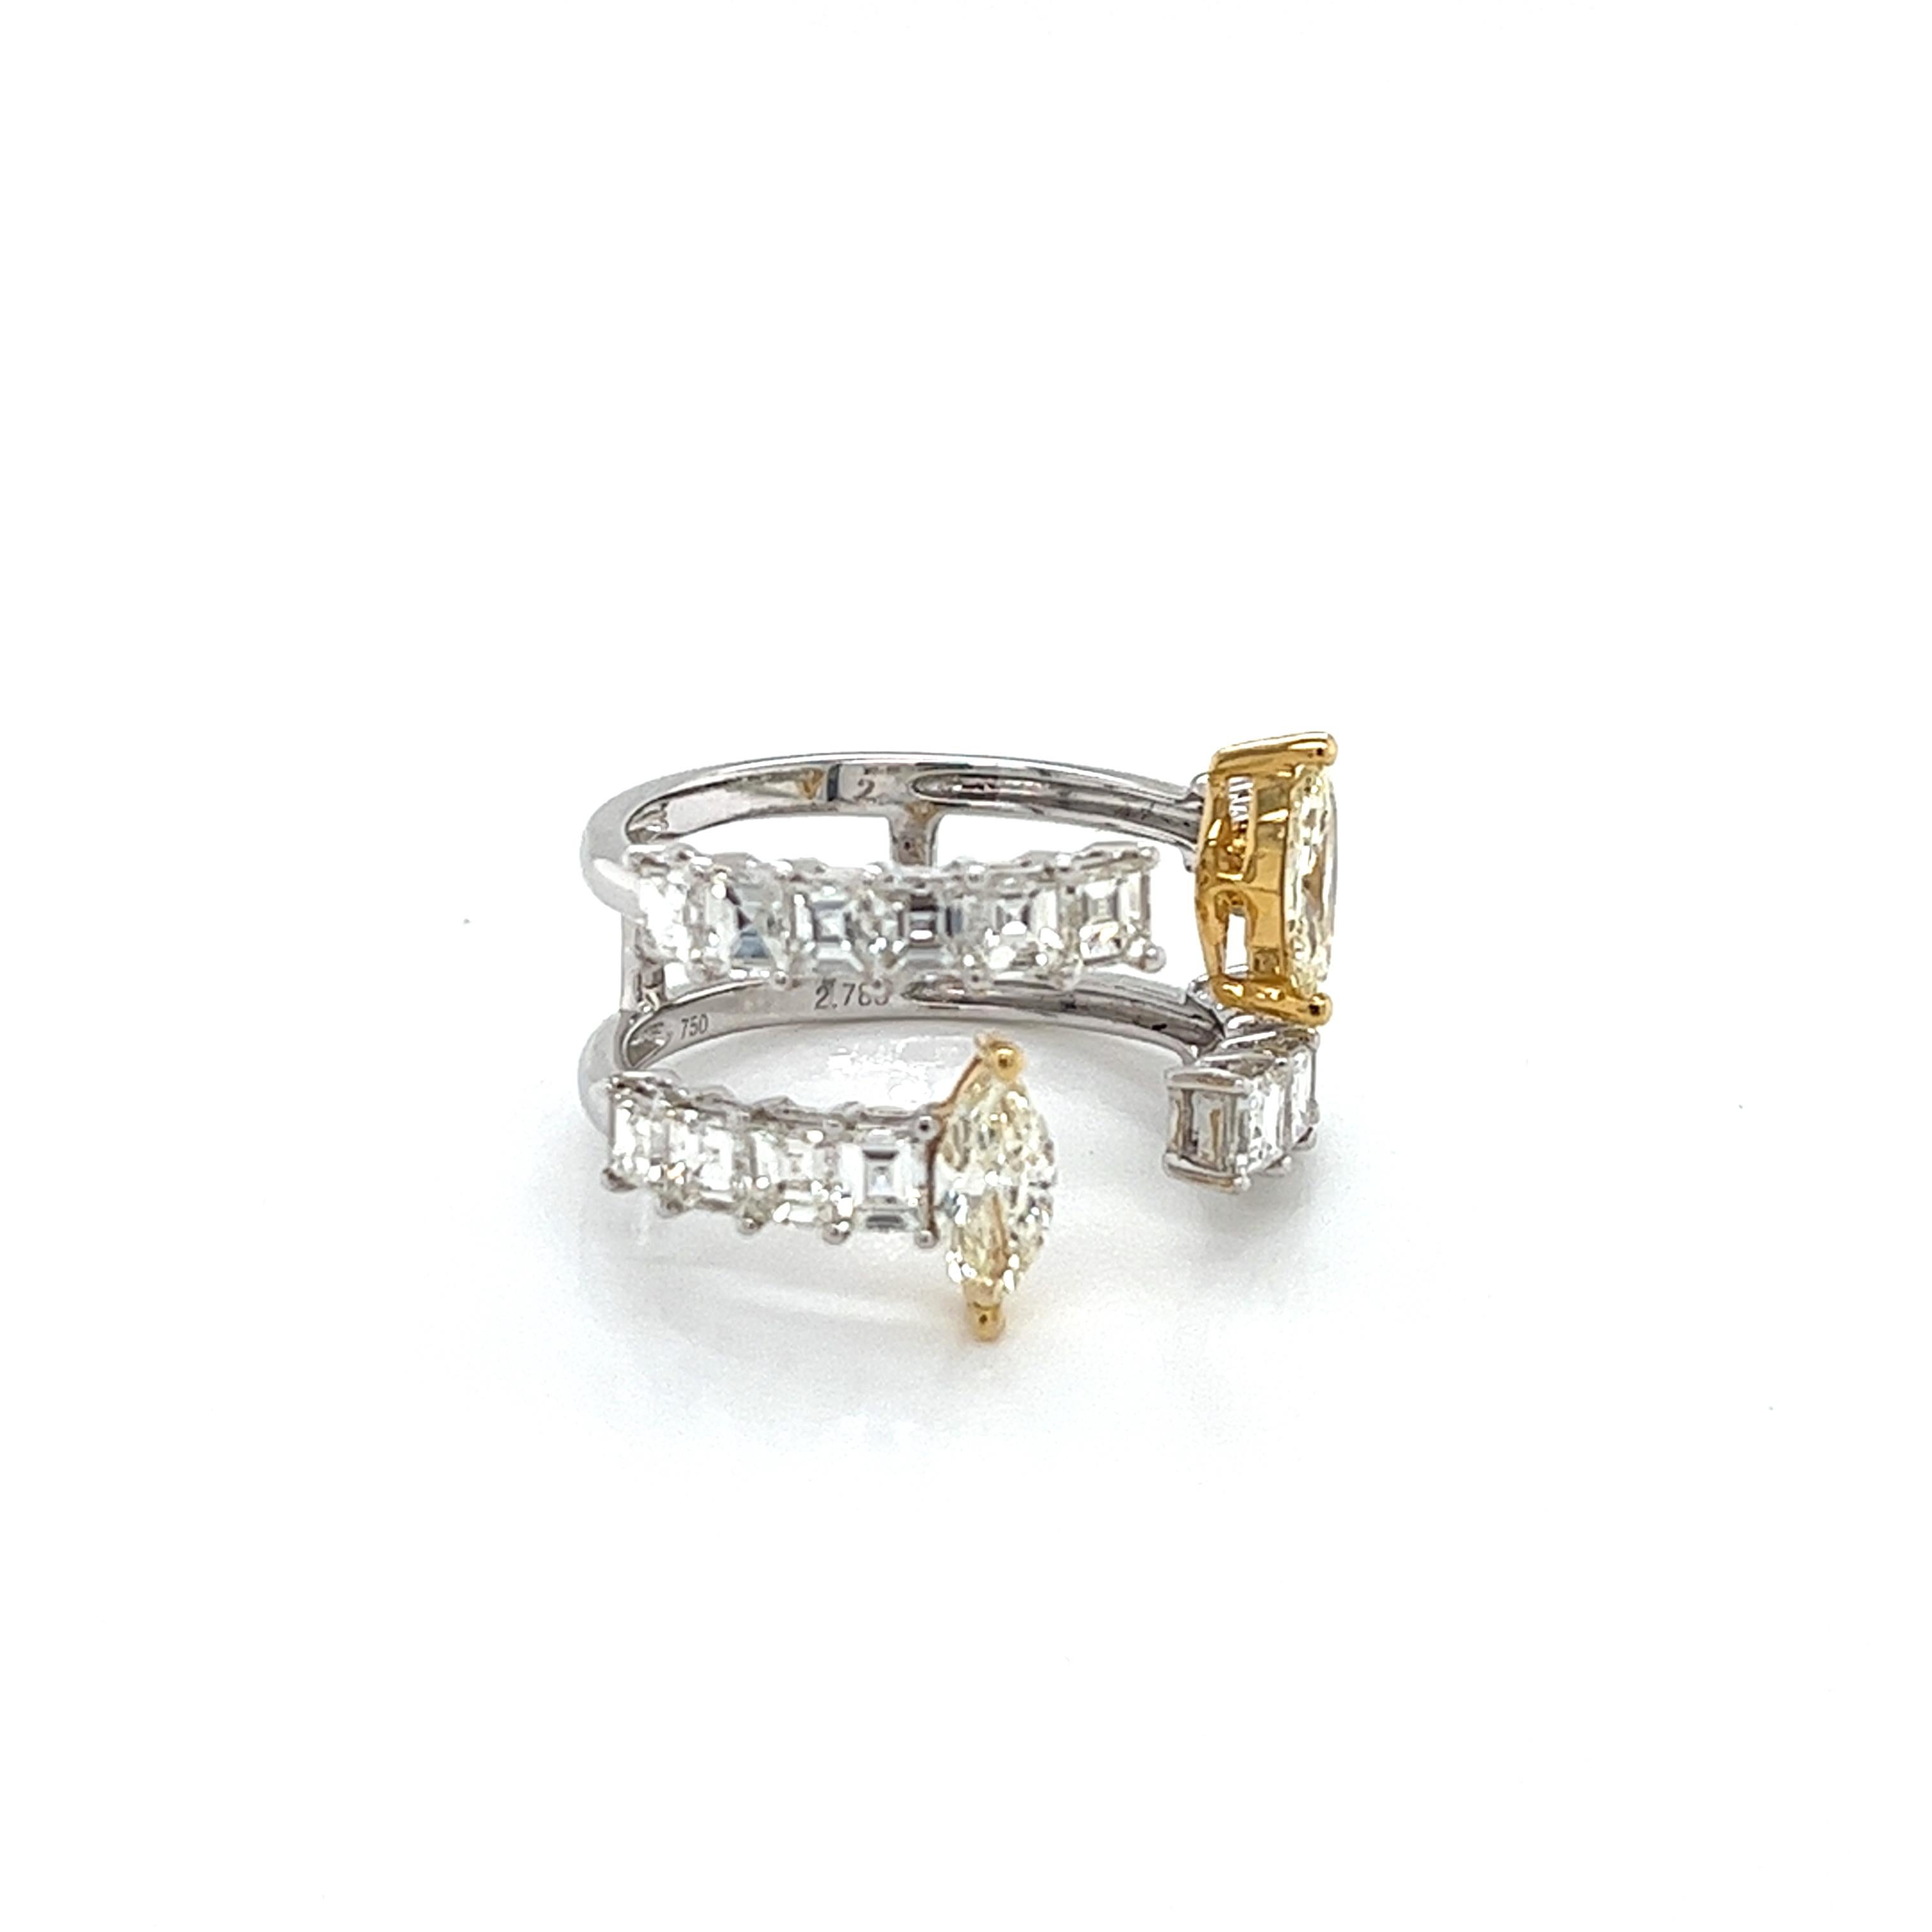 18Kt White and Yellow Gold Ring with diamons 2.79 cts. For Sale 1